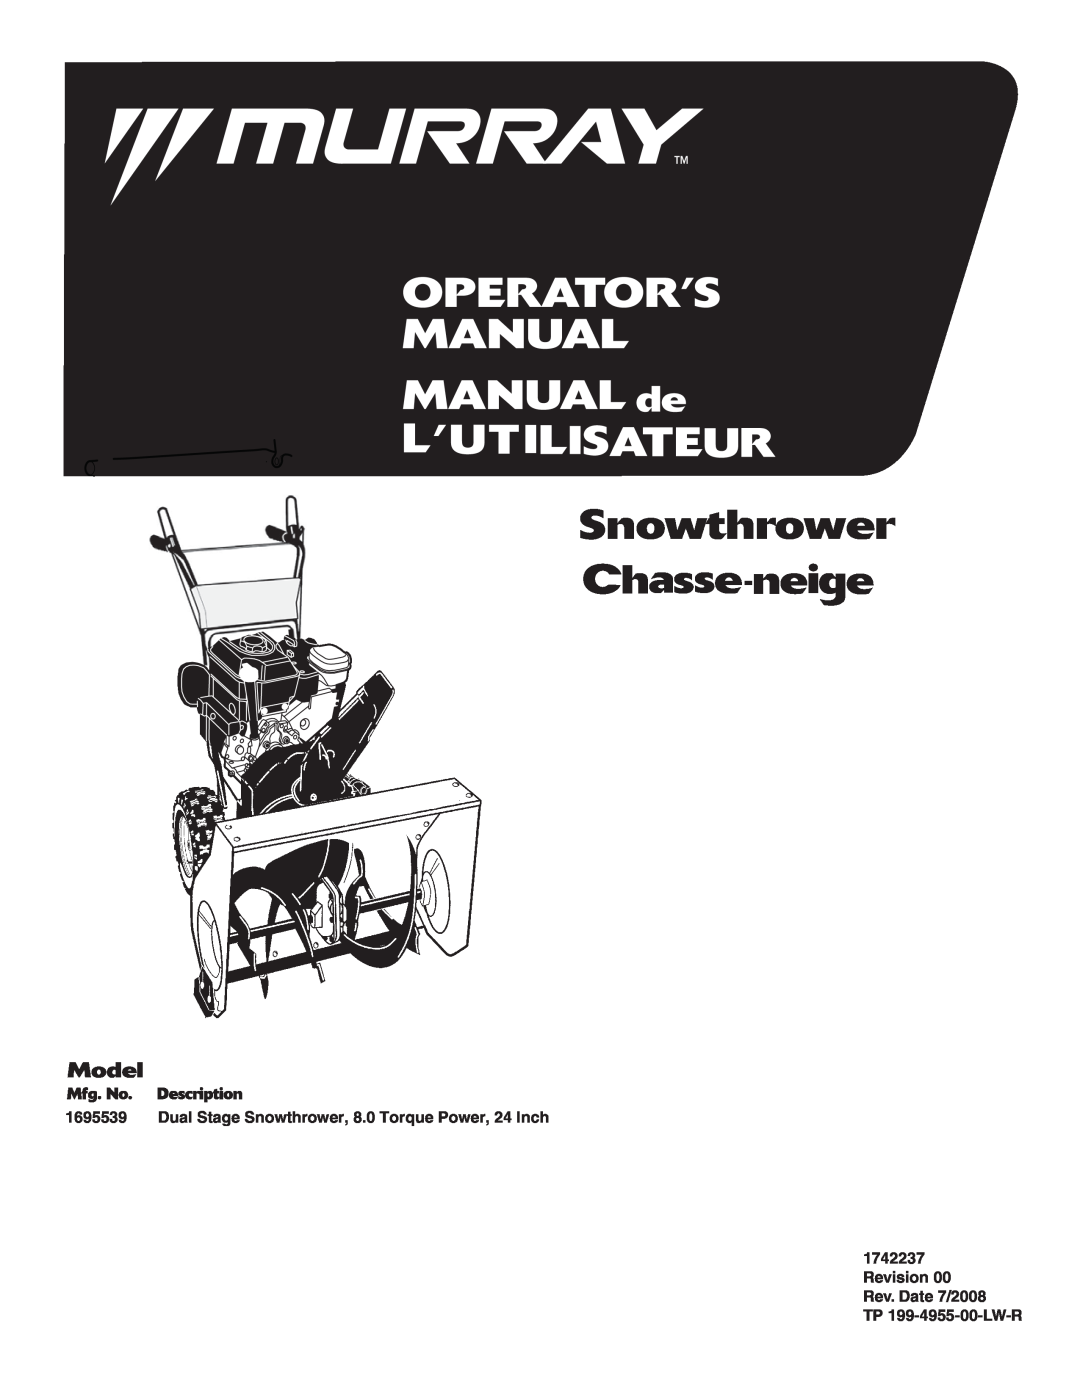 Murray 1740873 manual Dual Stage Snowthrower, 8.0 Torque Power, 24 Inch, Revision 00 Rev. Date 7/2008 TP 199-4955-00-LW-R 